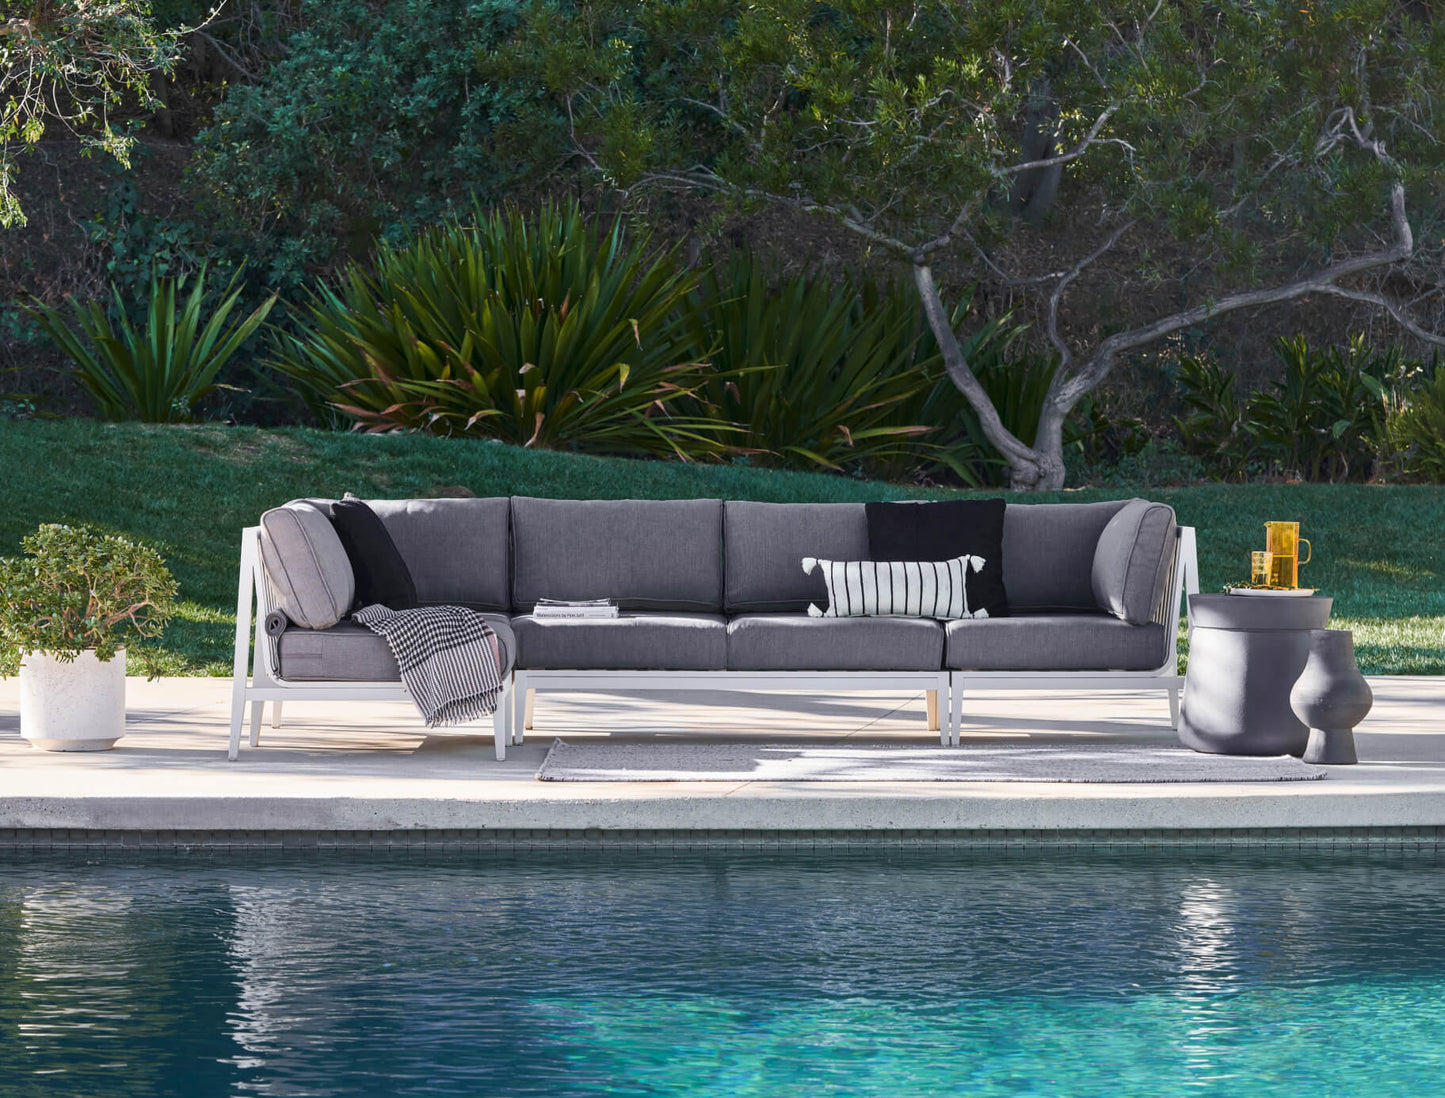 Live Outer 98" White Aluminum Outdoor Sofa With Armchairs and Dark Pebble Gray Cushion (5-Seat)